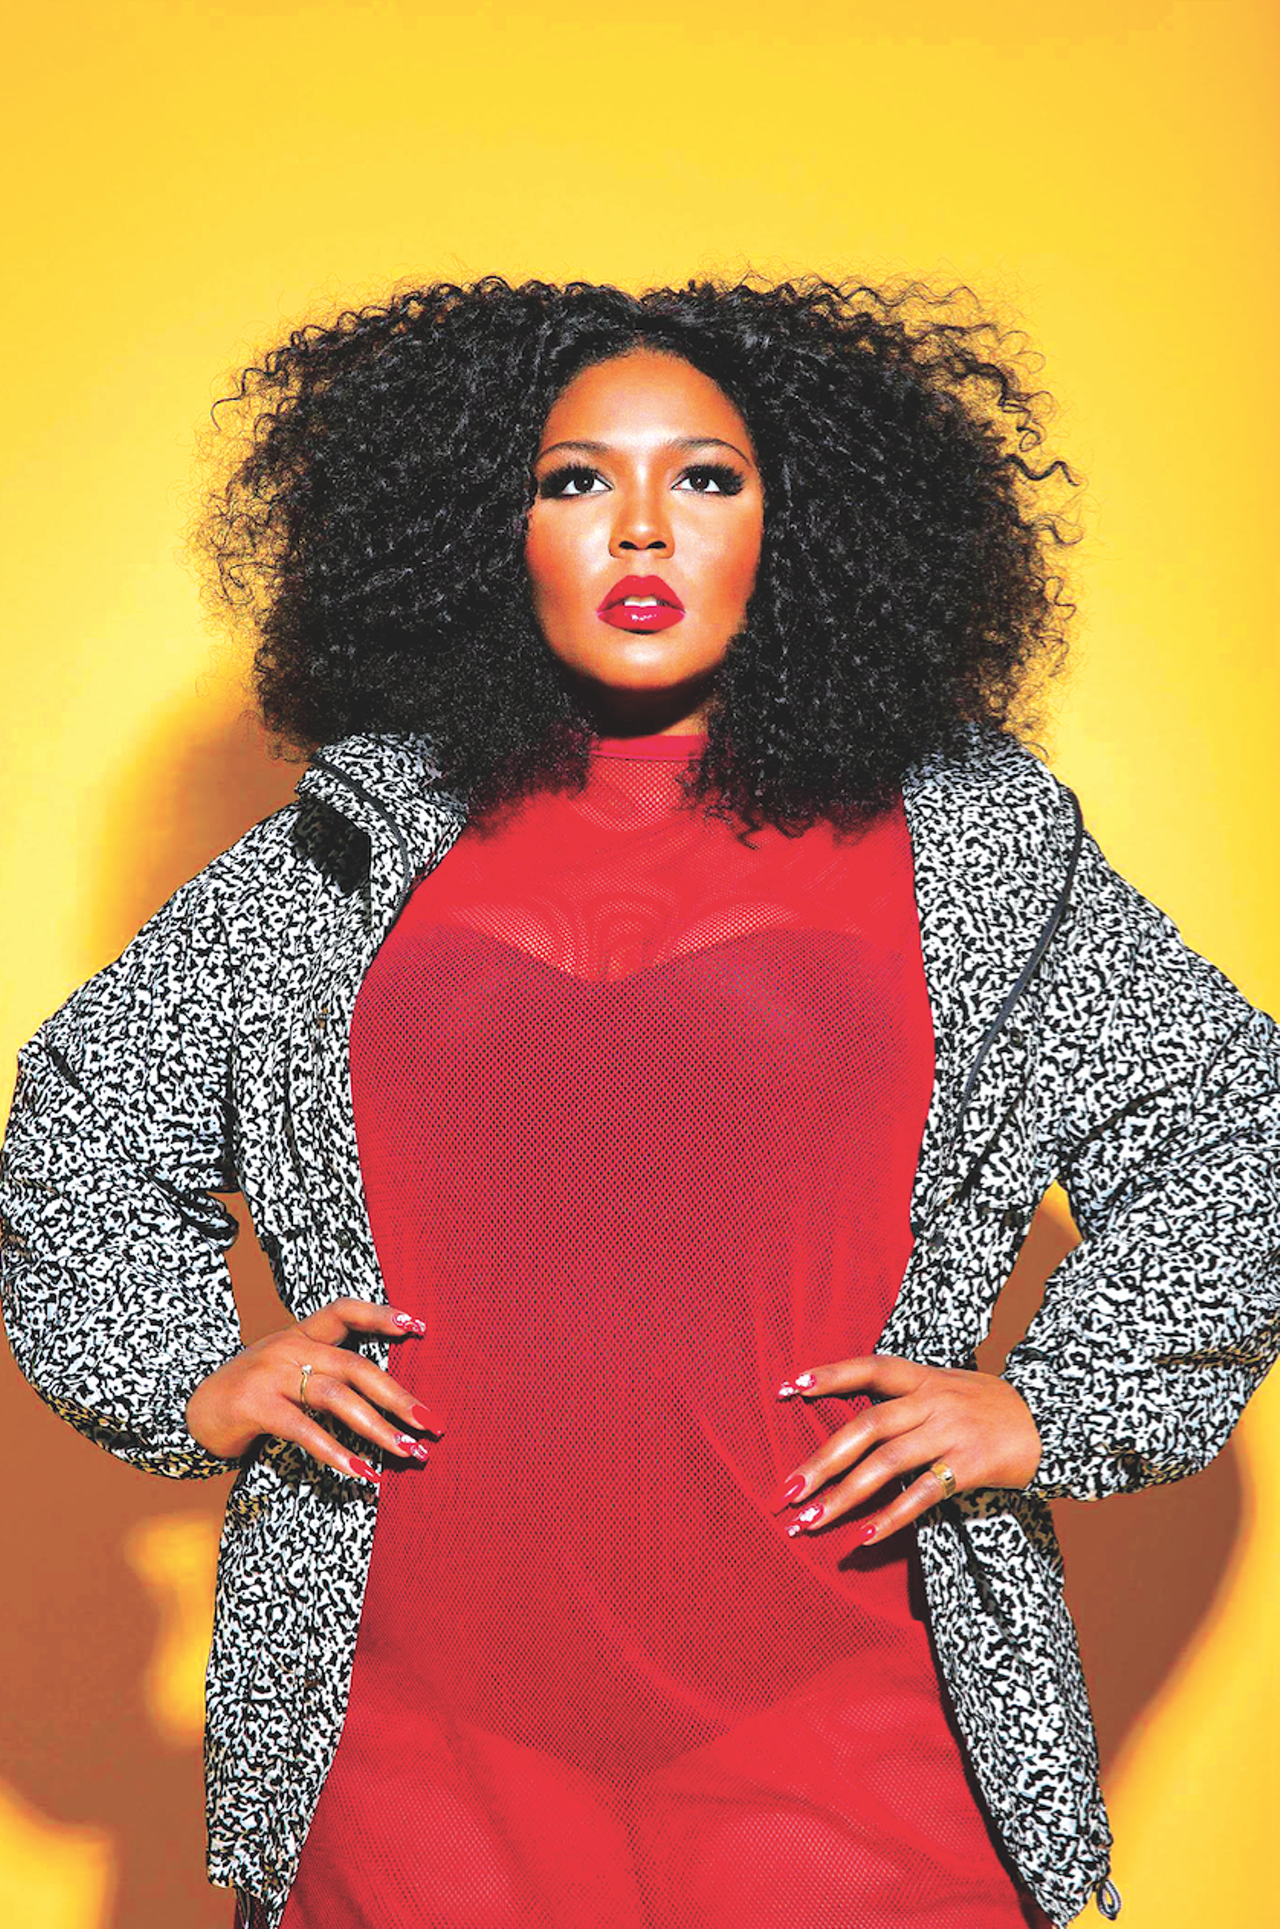 Sat 11/4, Lizzo
When Lizzo released her 2016 EP Coconut Oil, it felt like the entire music world paused and was like “wait — what — who is this?” It’d been a long time since a new artist was able to transcend the underground R&B world to the bleeding edge of pop whilst keeping her personality and lovable character at the forefront of her music. With songs about loving yourself (“Scuse Me”) and a hilarious track about misplacing your phone after a night out with the girls (“Phone”), it was a breath of fresh air to see a #thicc R&B chick bring it as hard as, dare I say, Beyonce (Fight me). Lizzo is the truth, and she’s coming to San Antonio to remind us that queens come in all shapes and sizes. With Doja Cat, $18, 8pm, Paper Tiger, 2410 N. St. Mary’s St., papertigersatx.com.